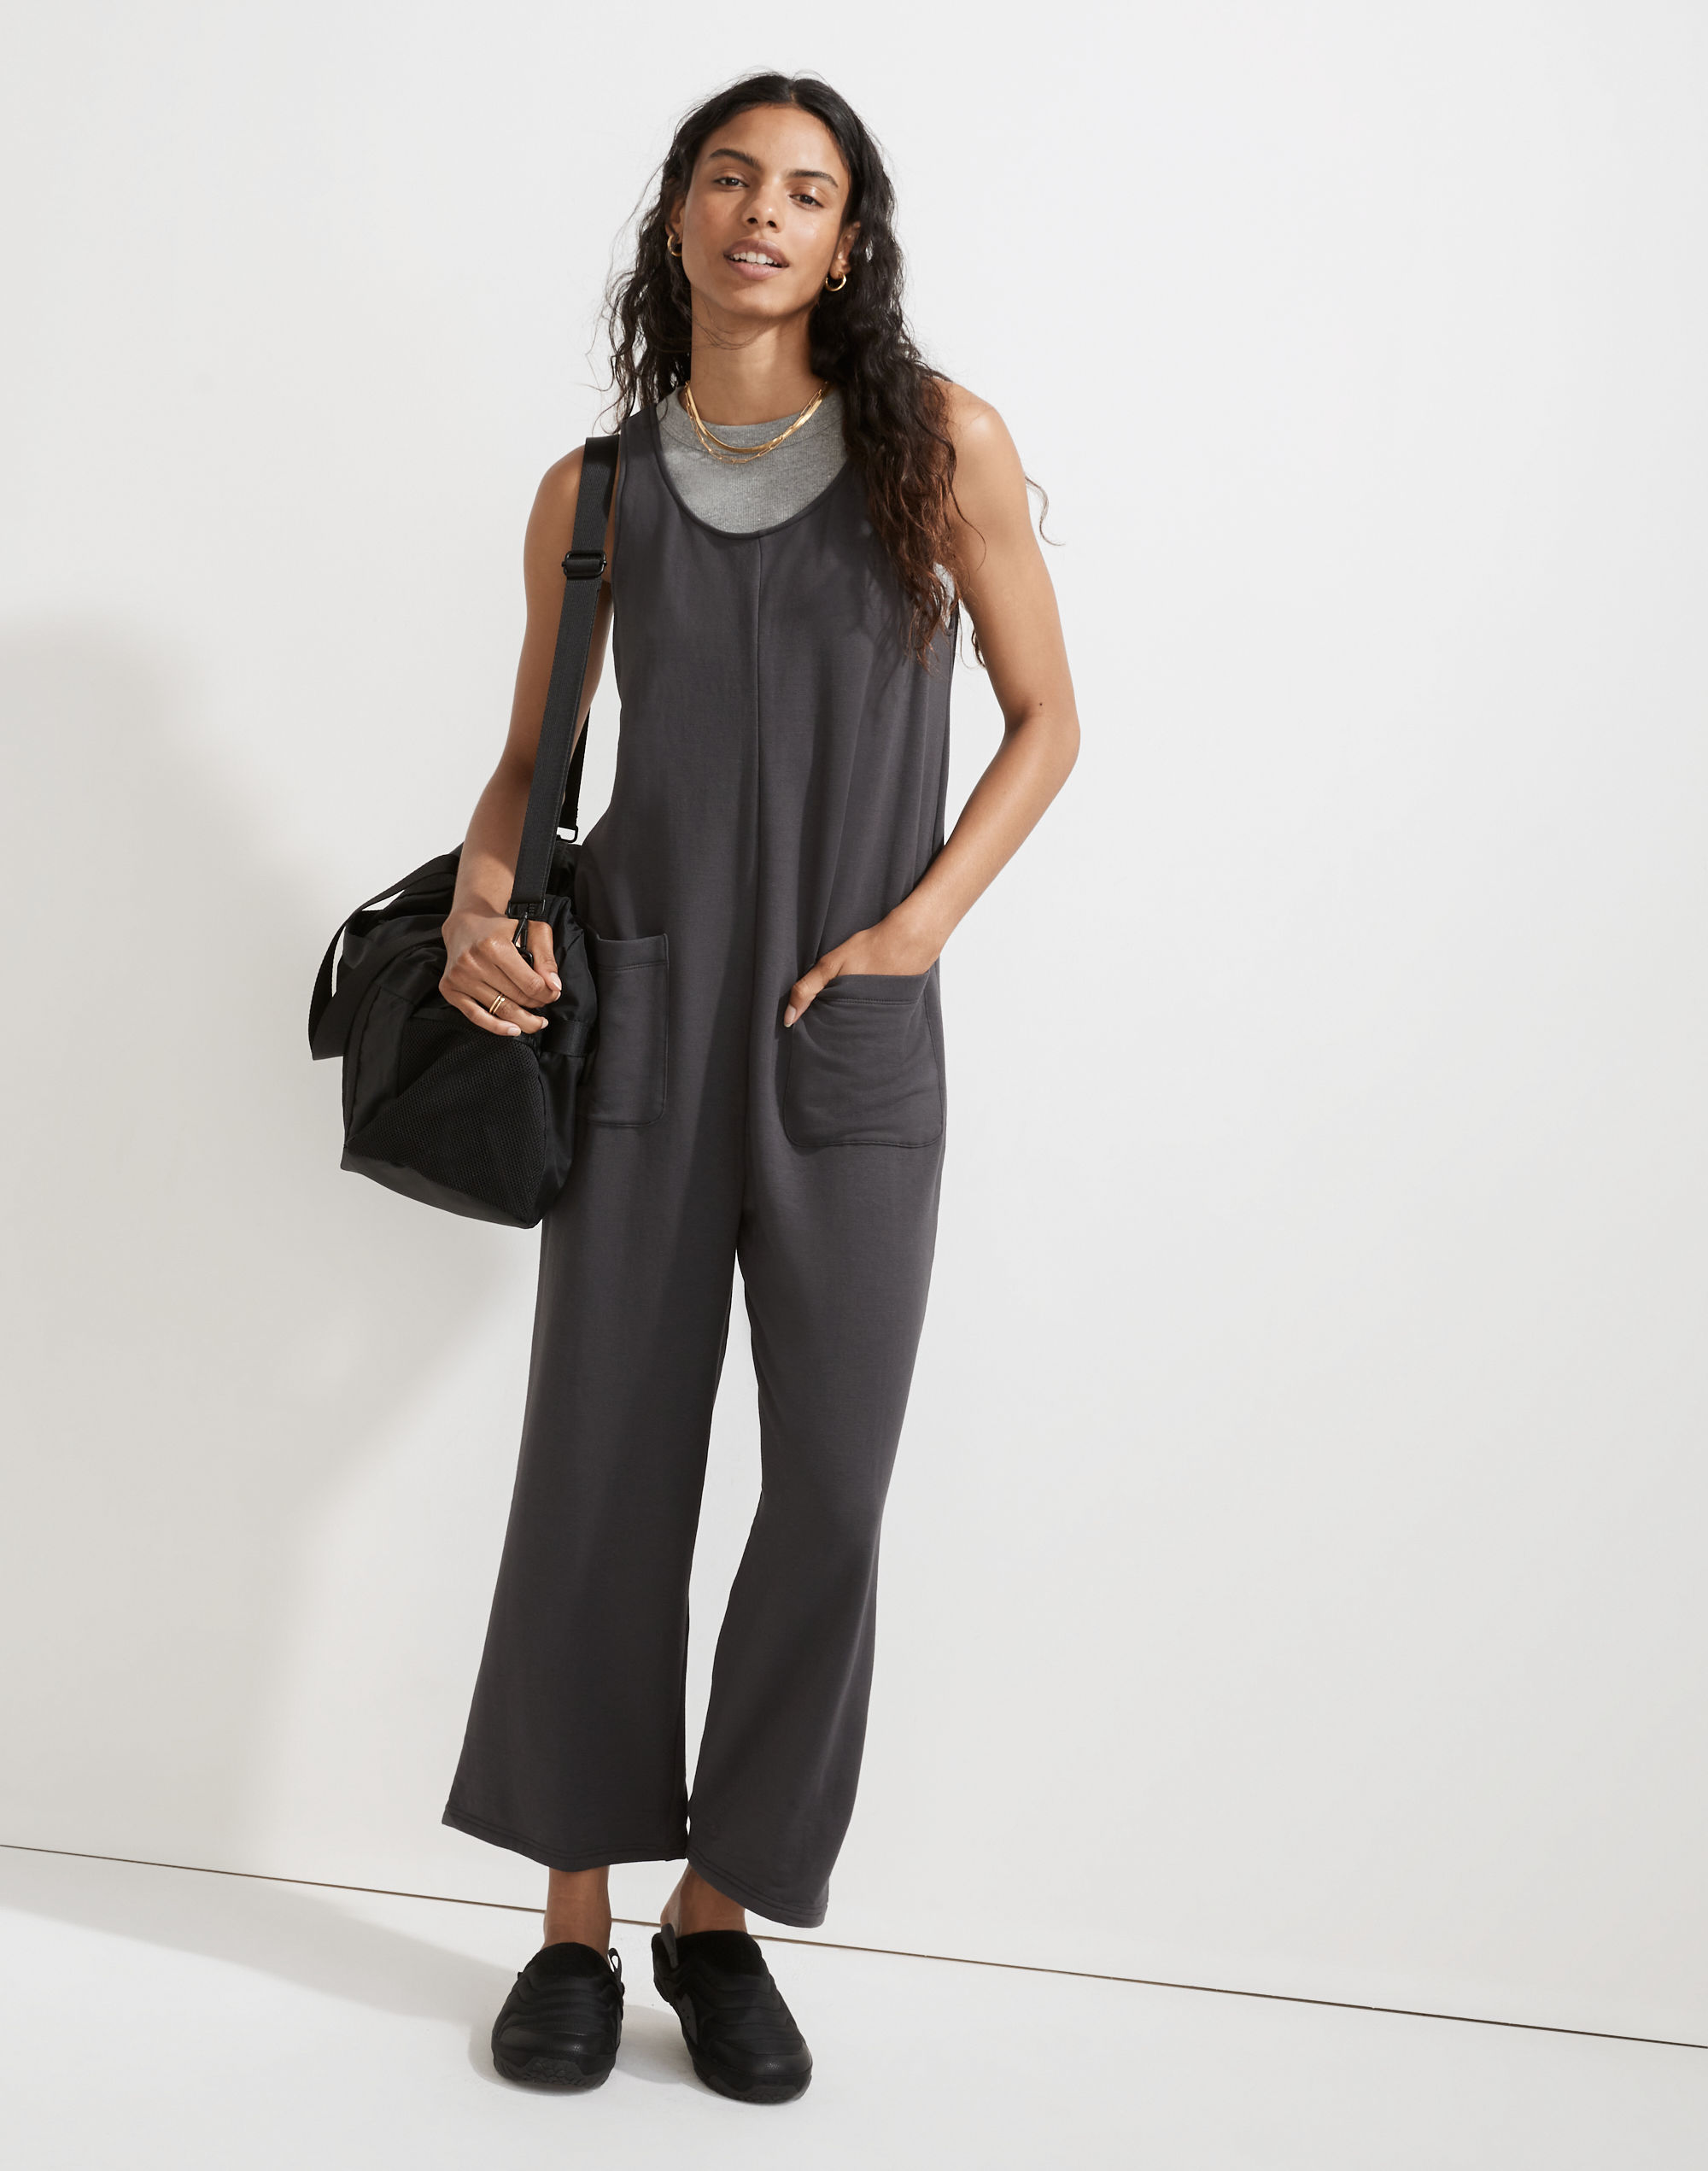 MWL Superbrushed Pull-On Jumpsuit